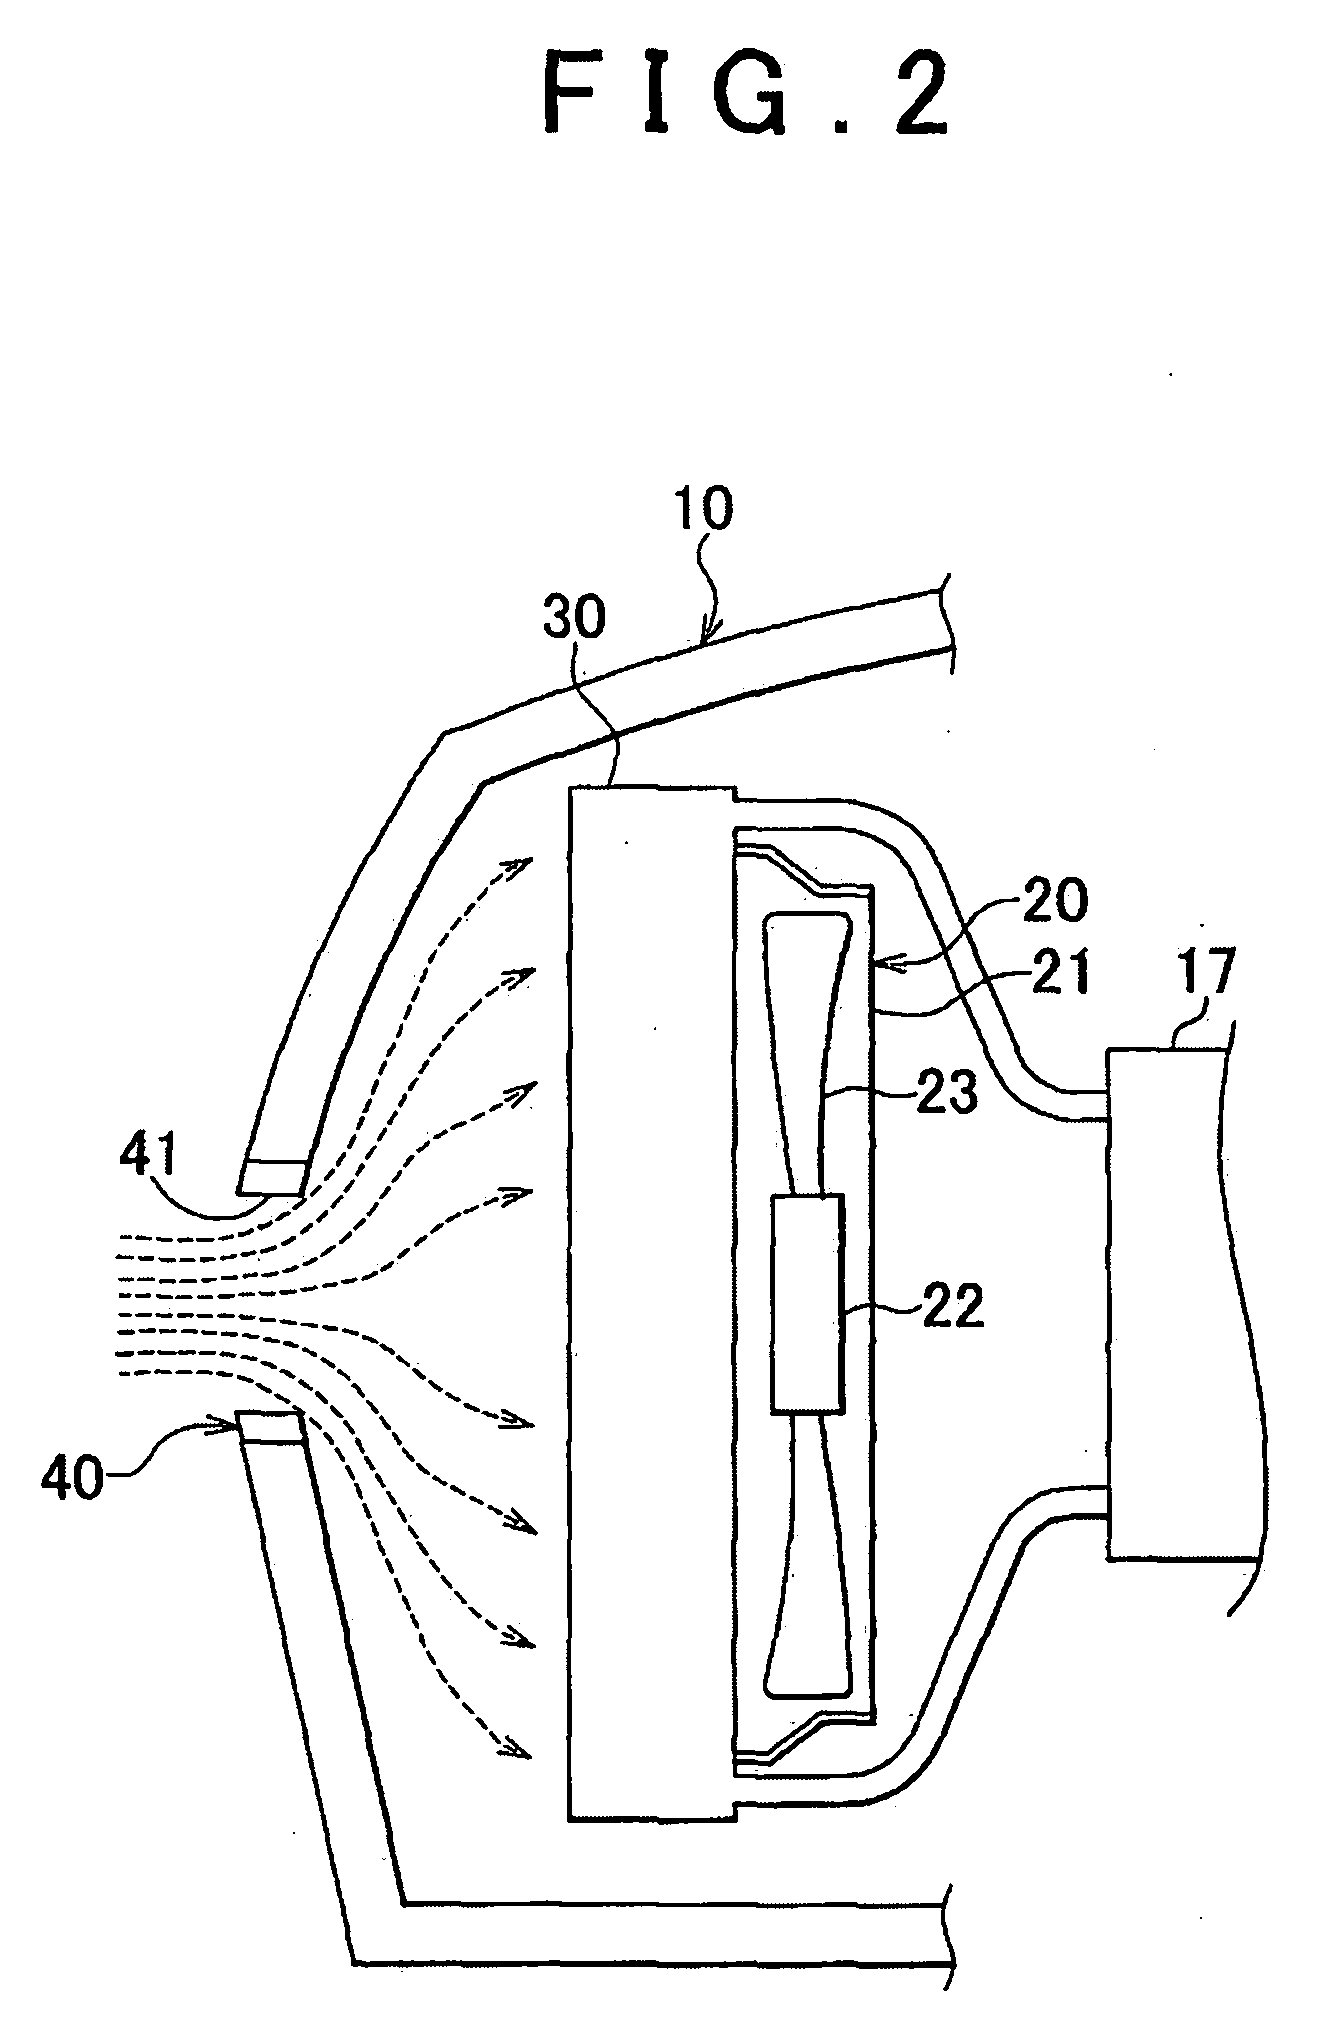 Fan operation control method and apparatus